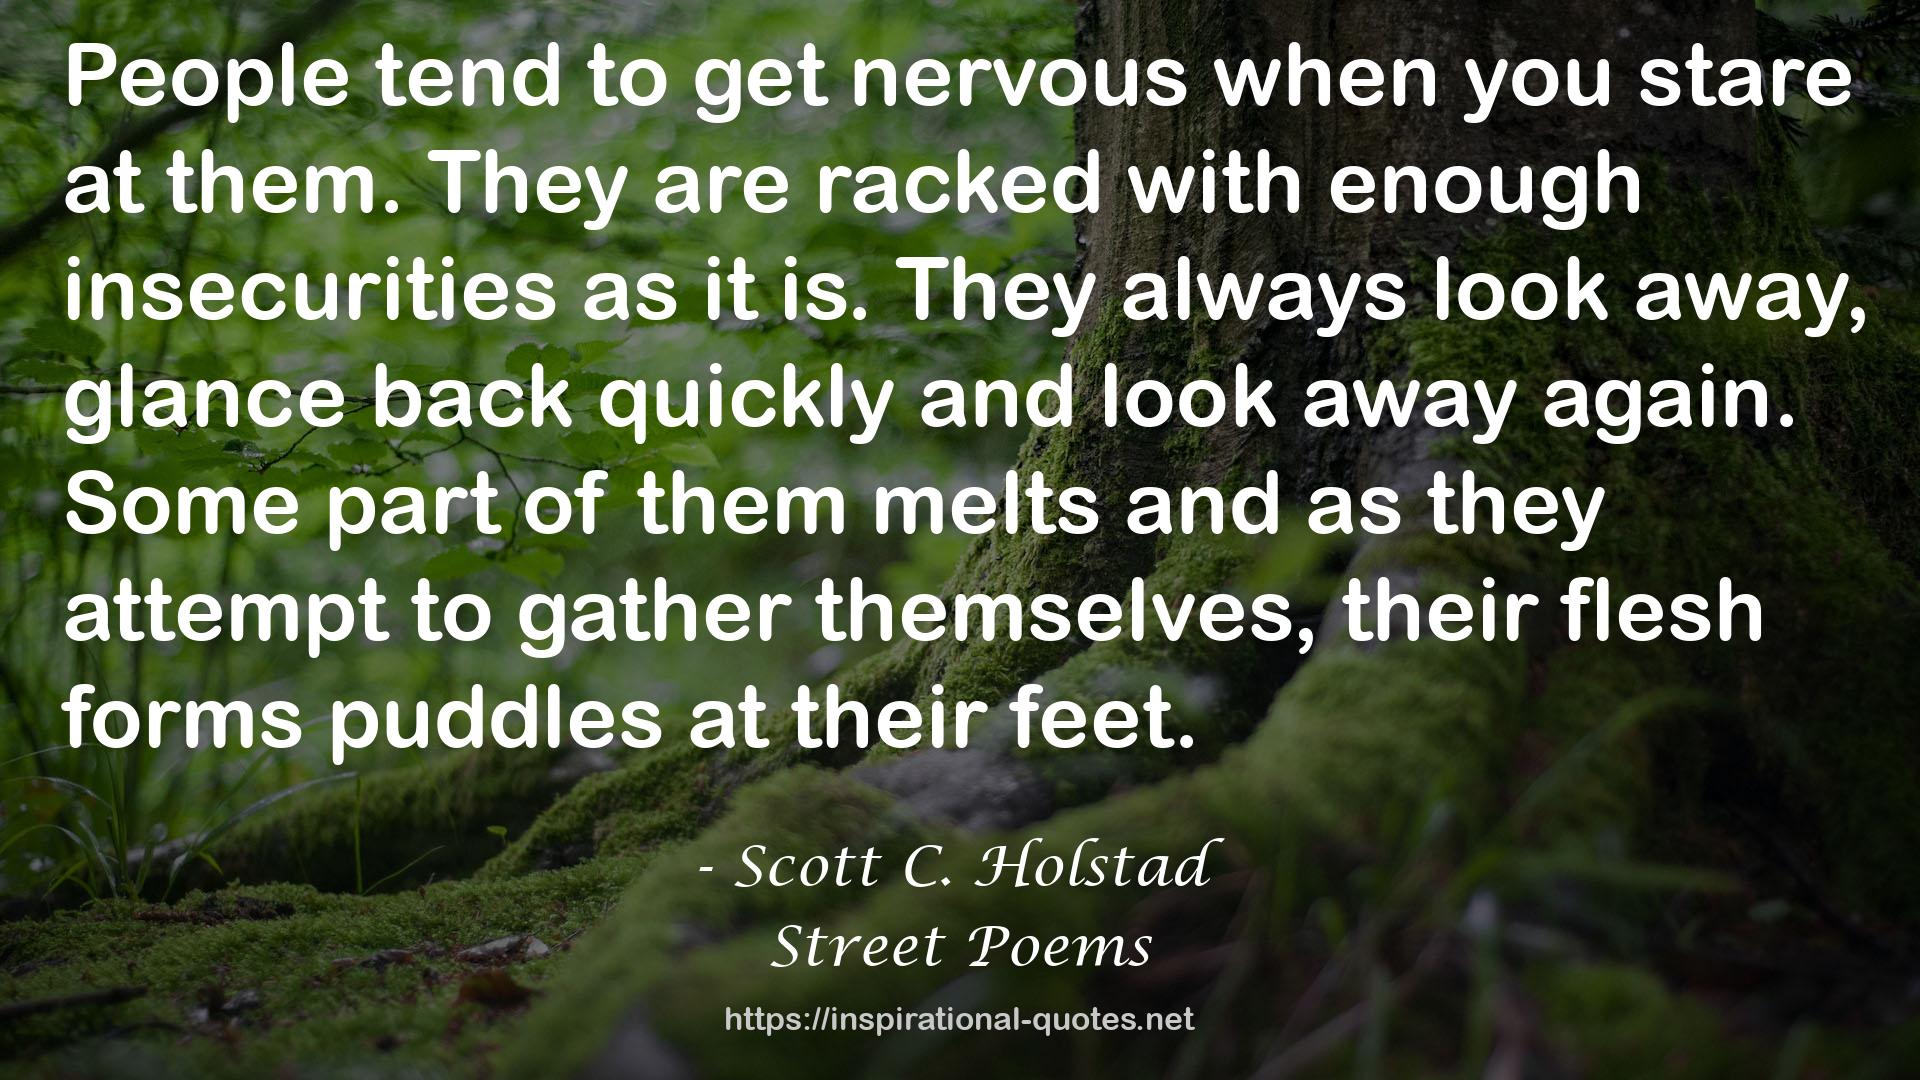 Scott C. Holstad quote : People tend to get nervous when you stare at them. They are racked with enough insecurities as it is. They always look away, glance back quickly and look away again. Some part of them melts and as they attempt to gather themselves, their flesh forms puddles at their feet.